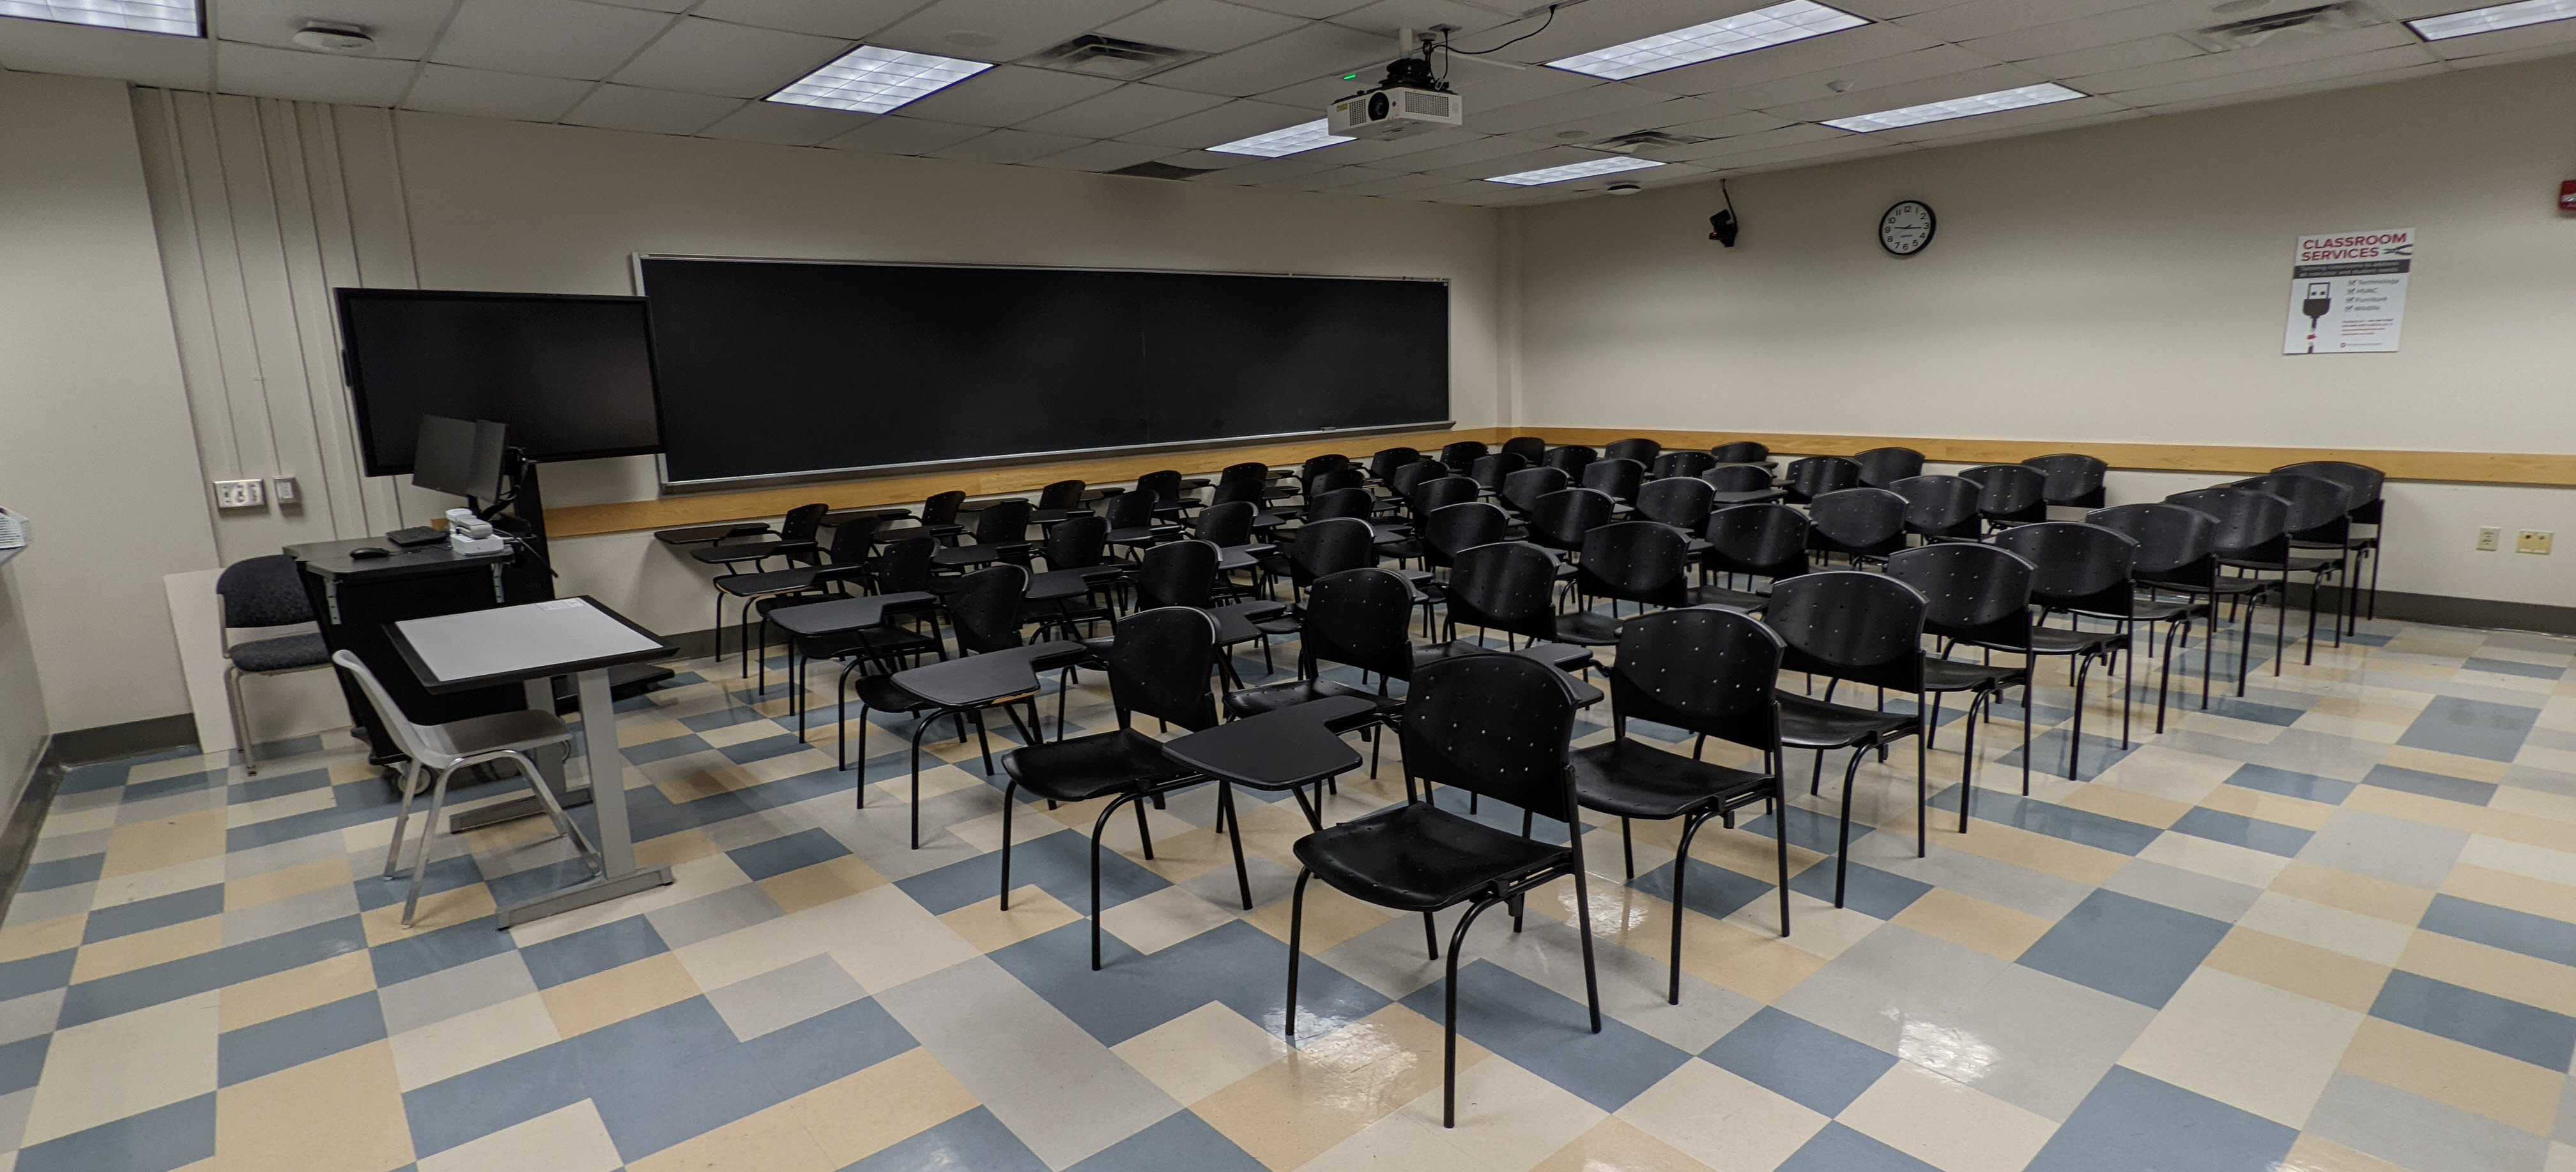 Journalism 239 before its renovation, featuring dated linoleum flooring and hard-to-reconfigure seating